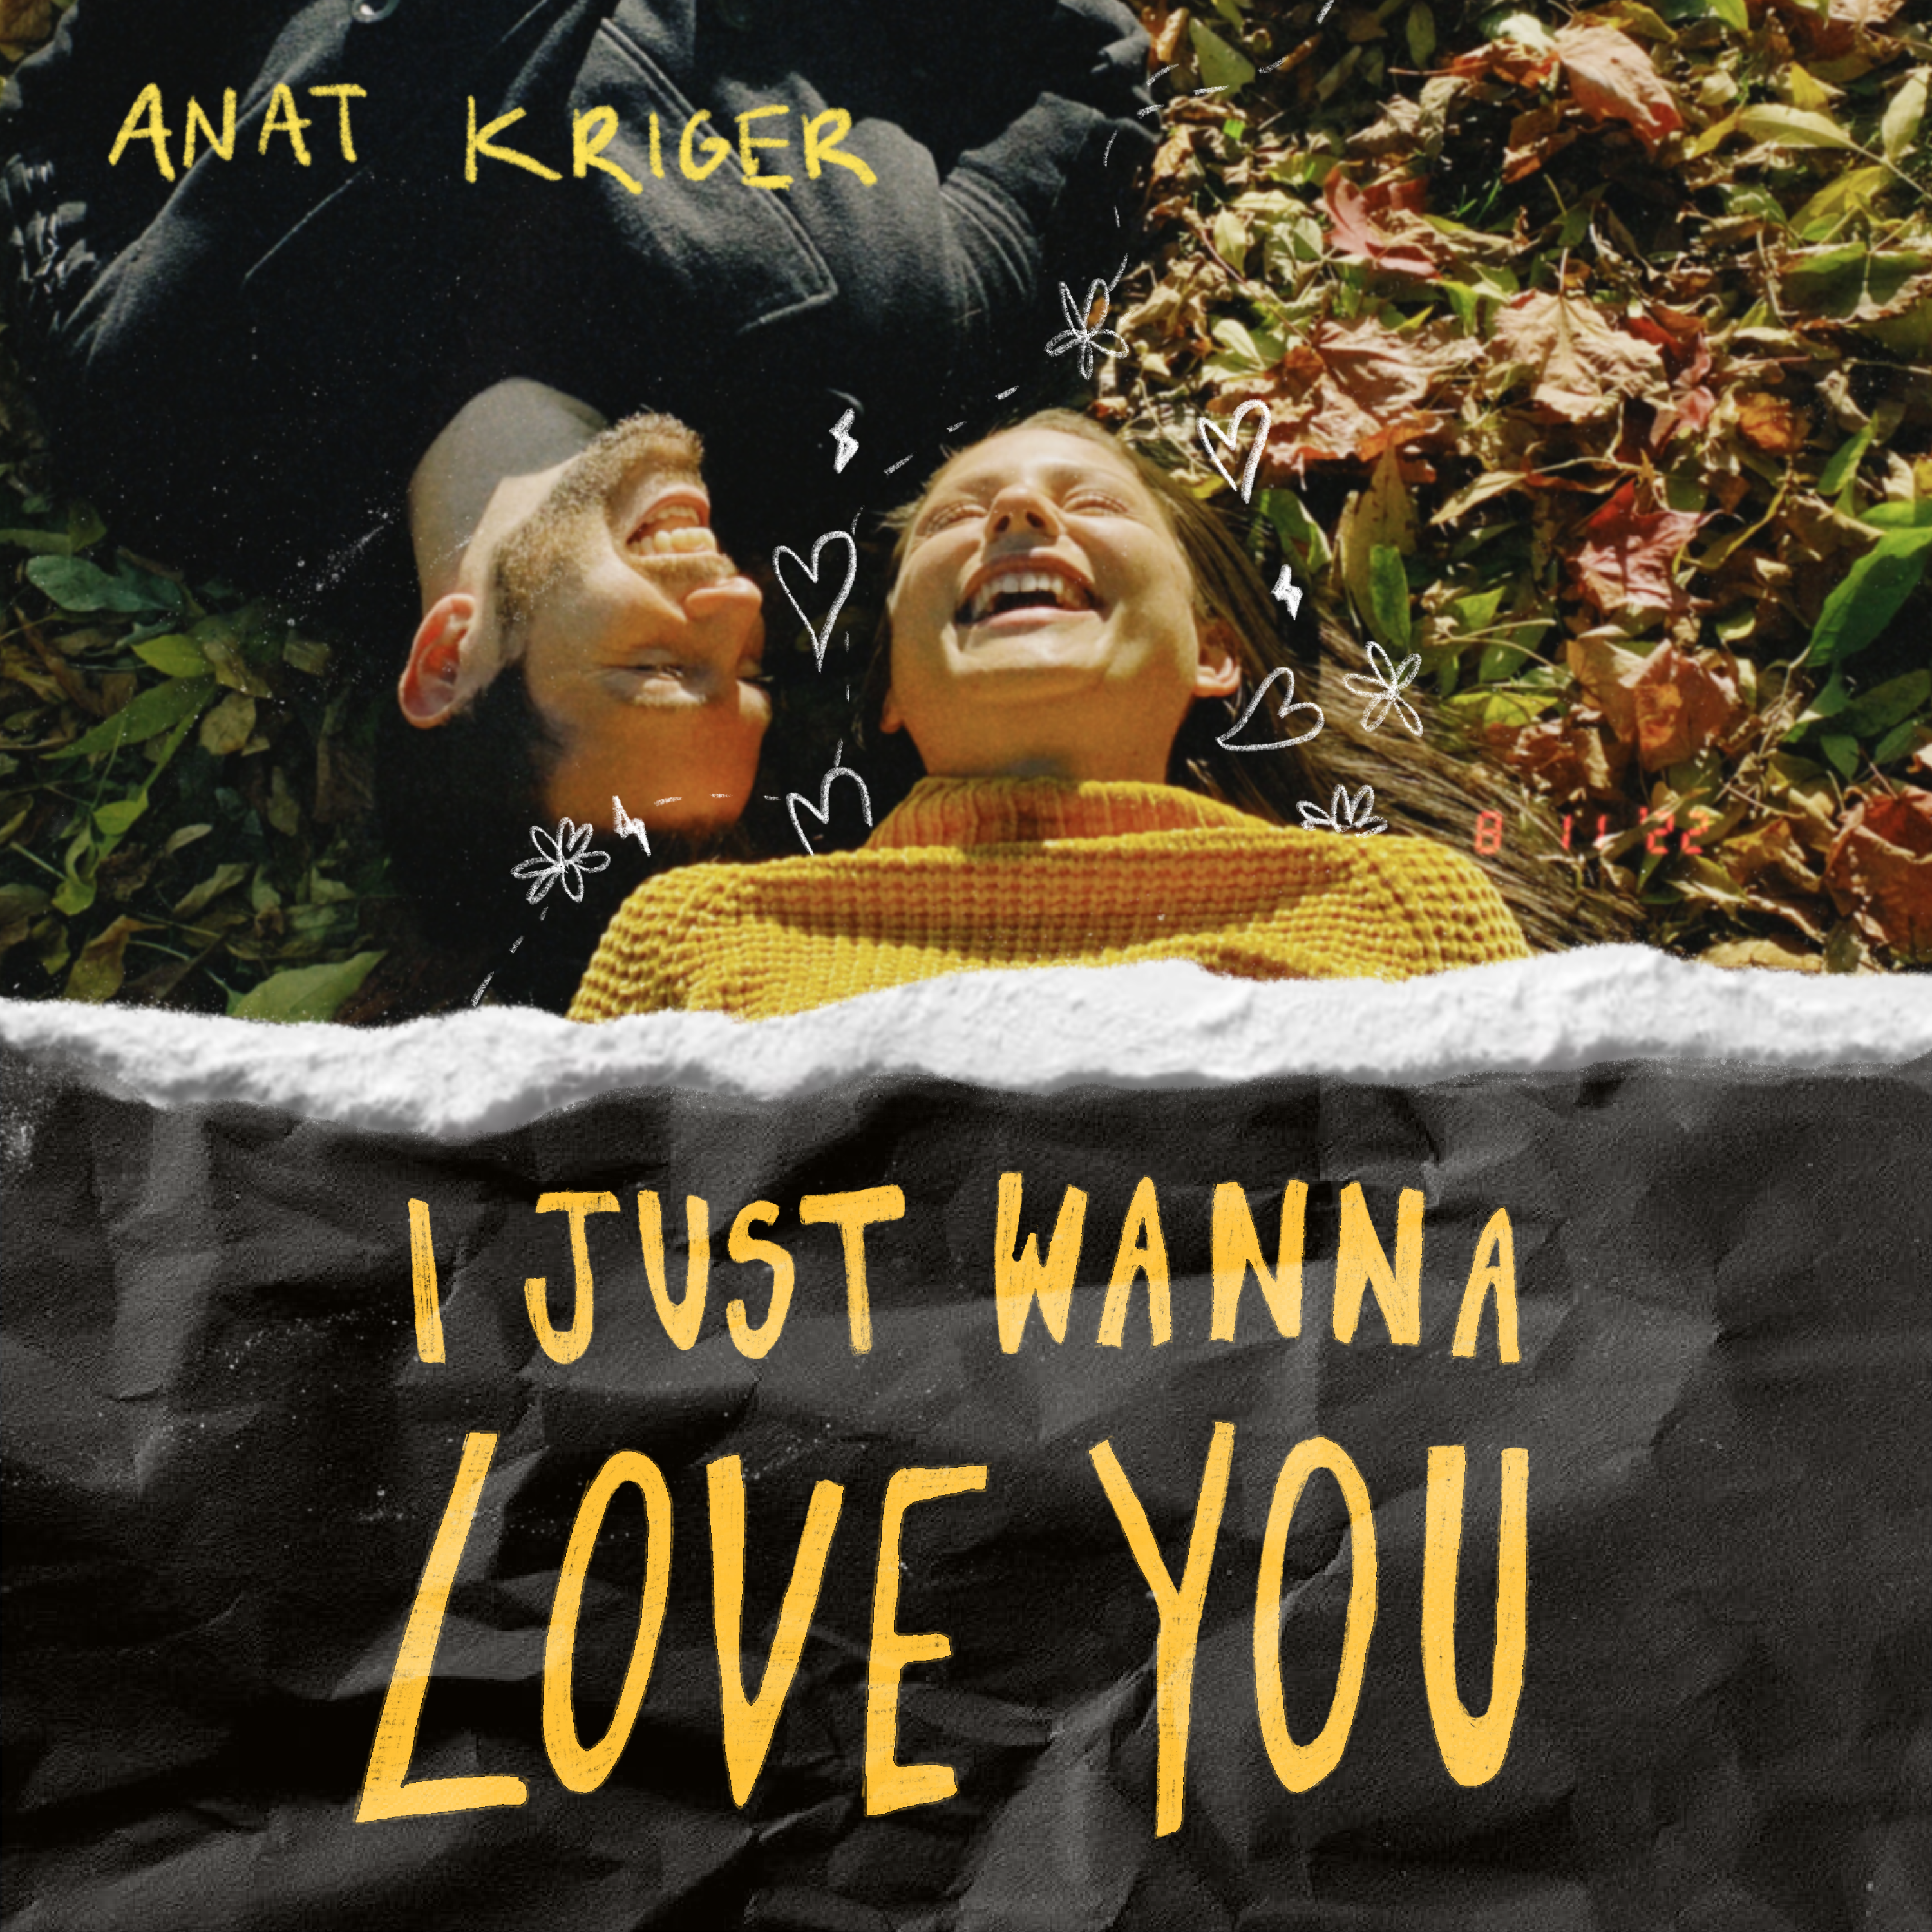 Anat Kriger releases her single, I Just Wanna Love You